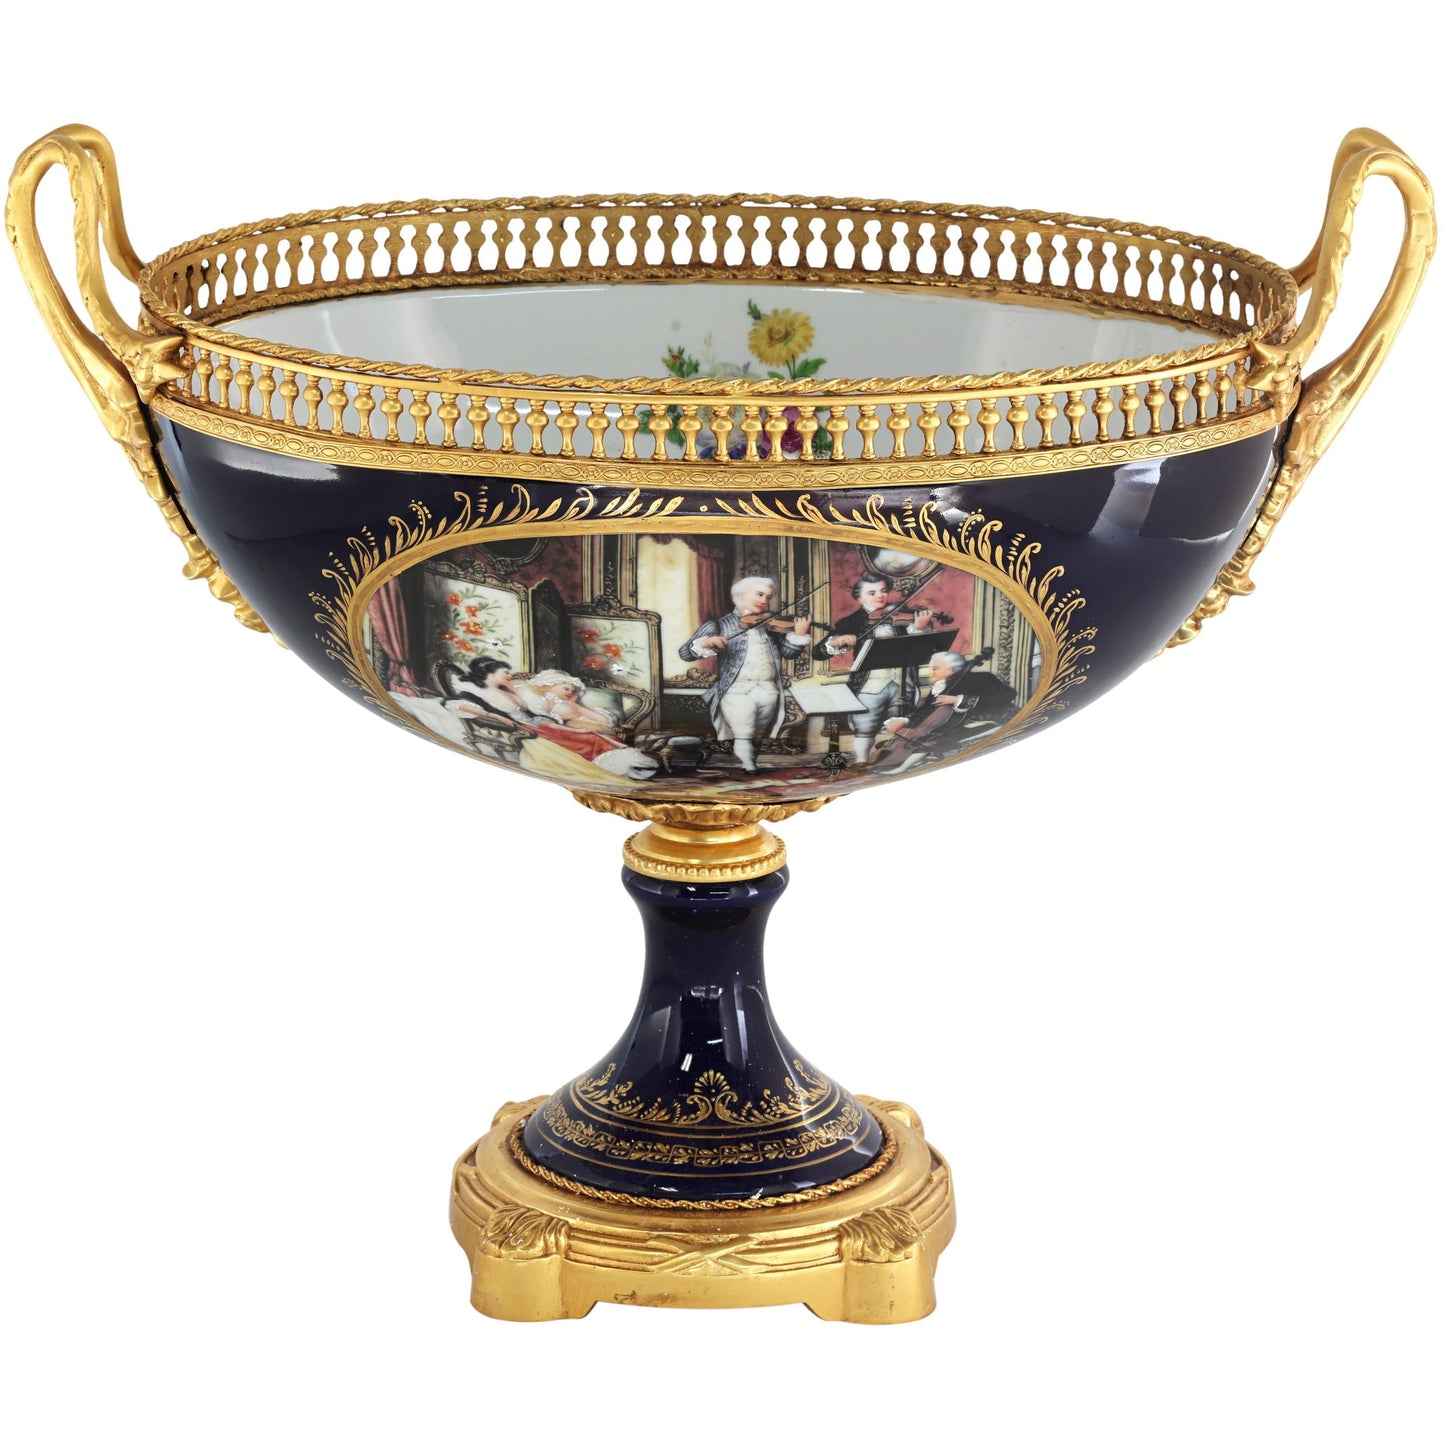 Hand-Painted Rococo Style Porcelain Serving Bowl